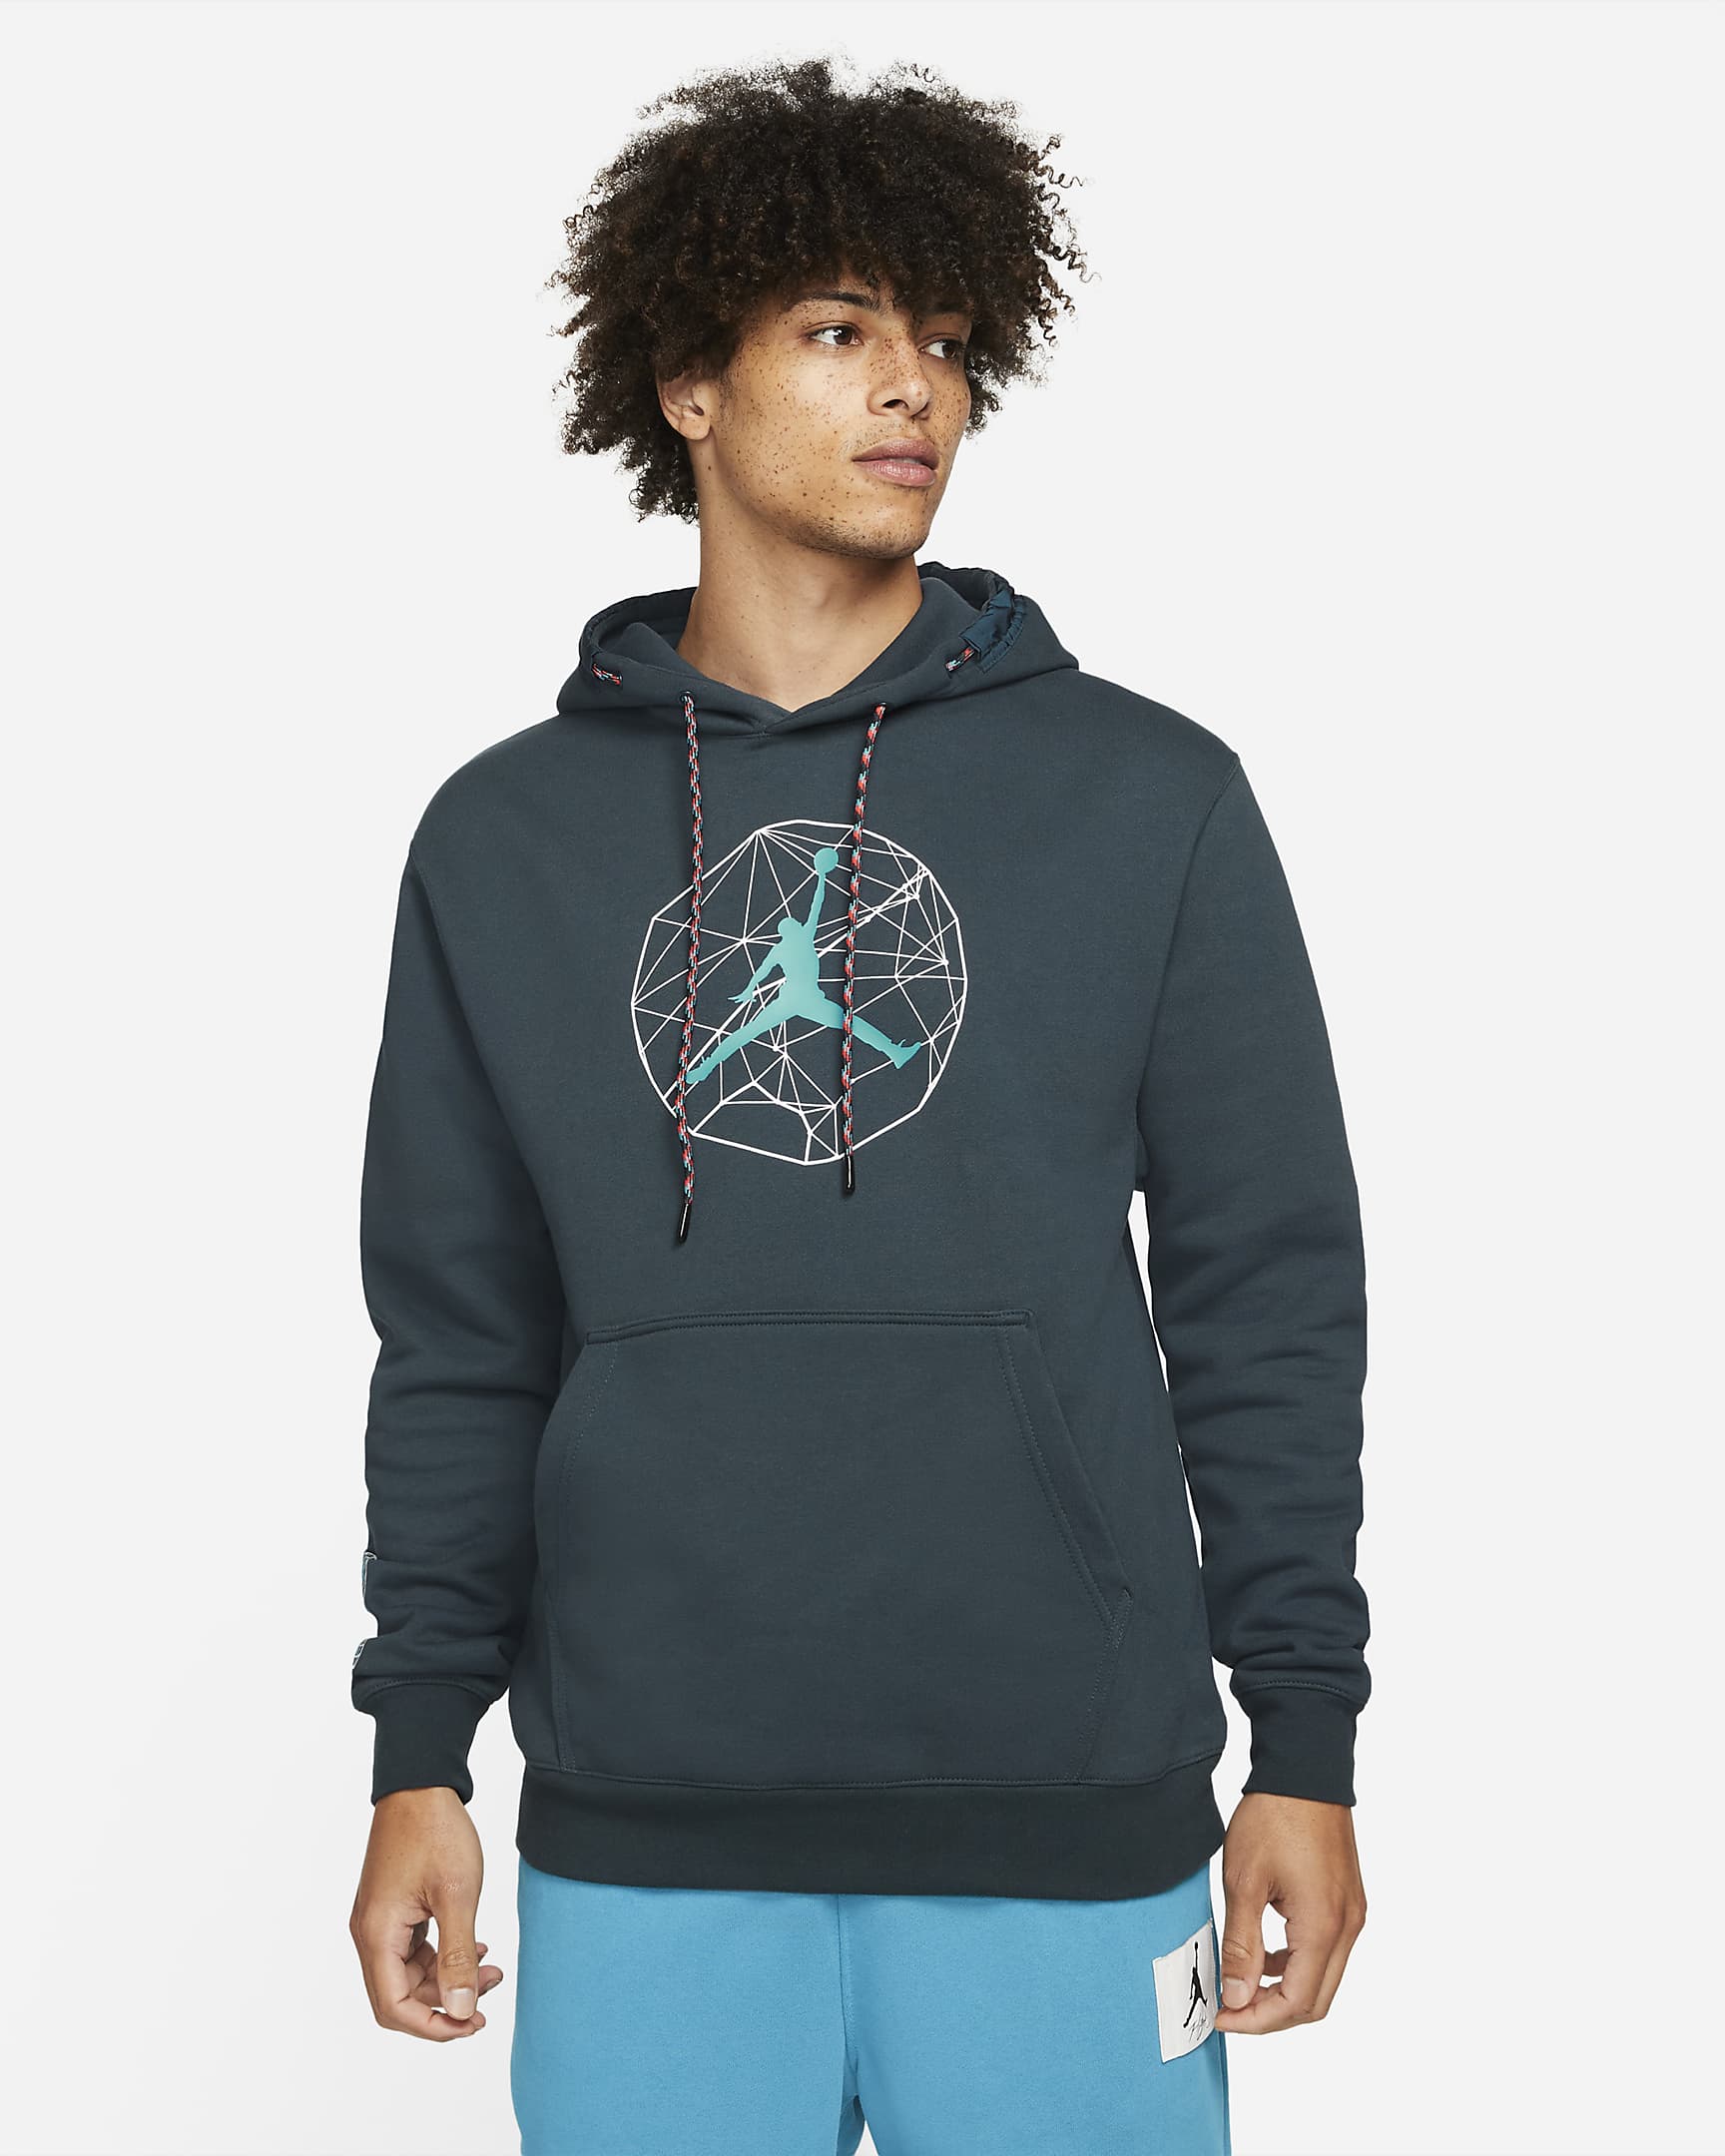 jordan-essentials-mountainside-mens-graphic-pullover-hoodie-xWXr1w.png